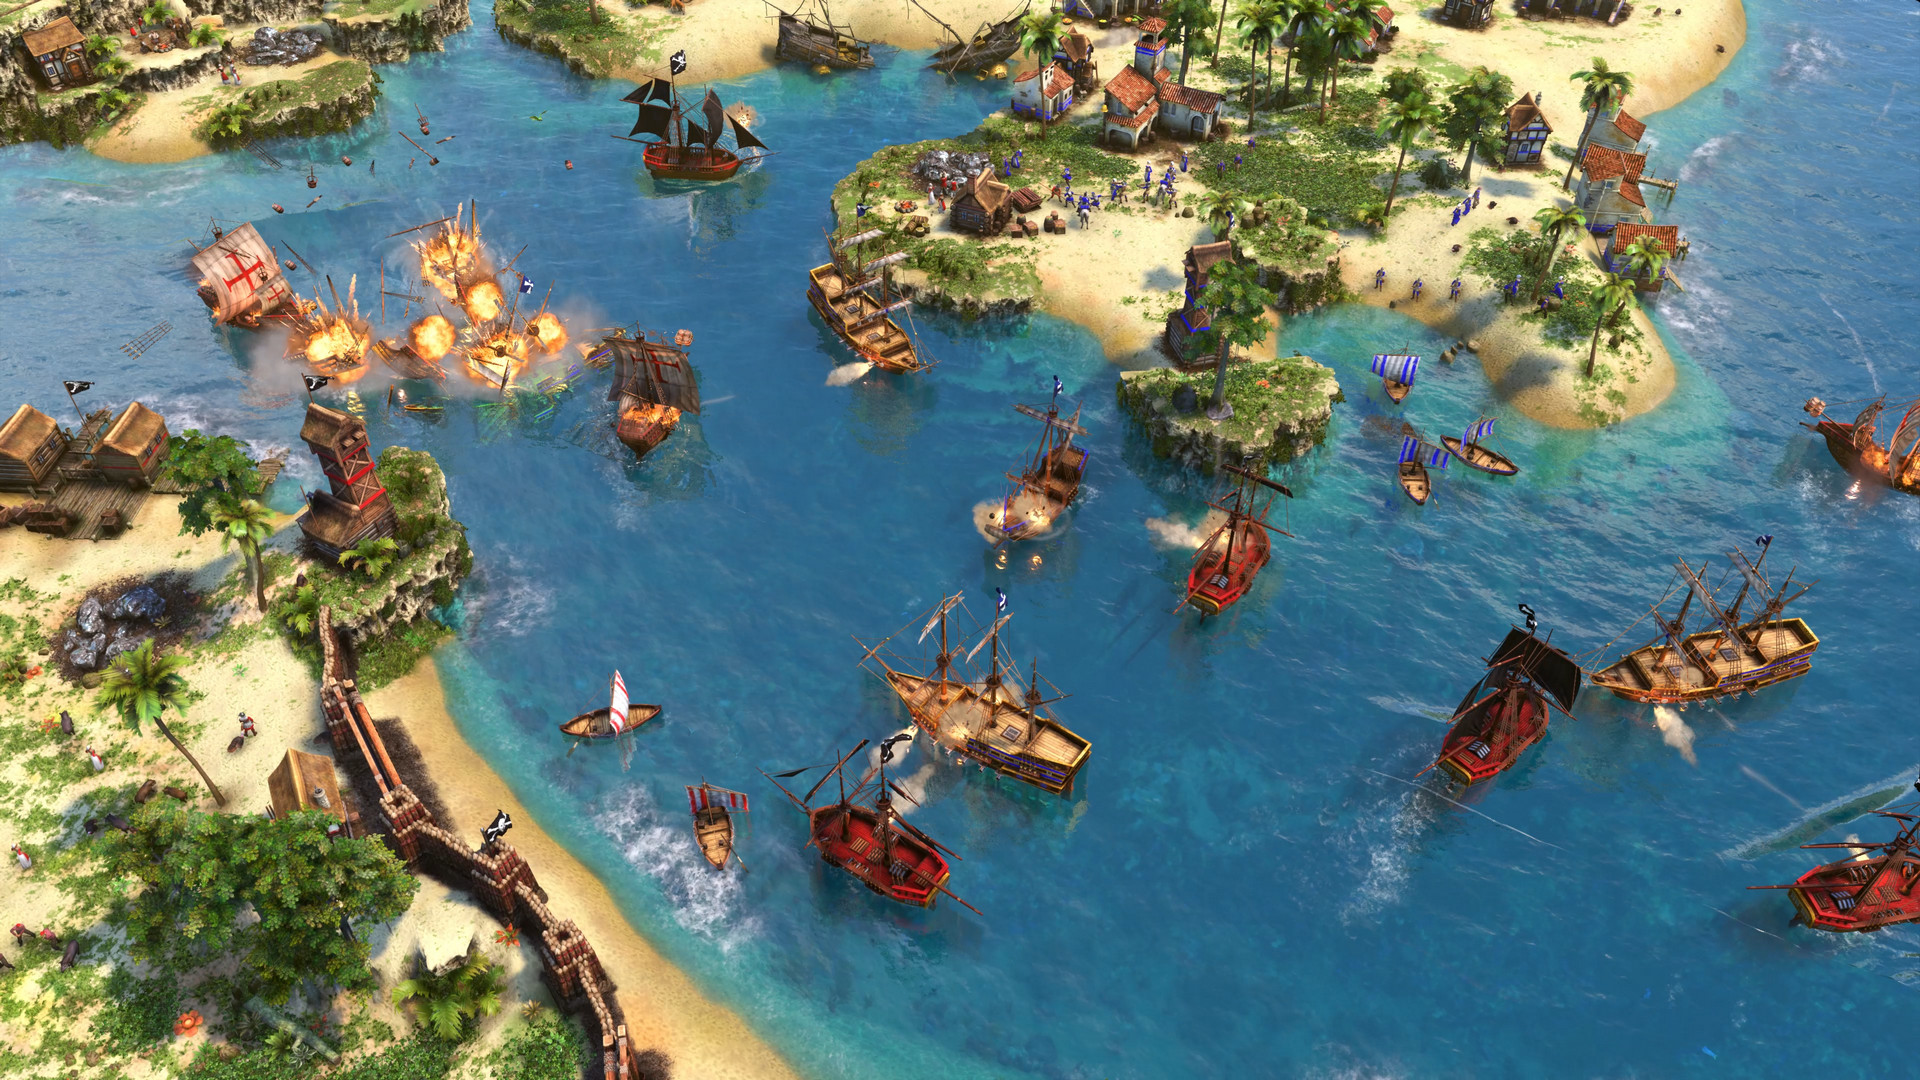 age of empires 3 definitive edition unlimited population